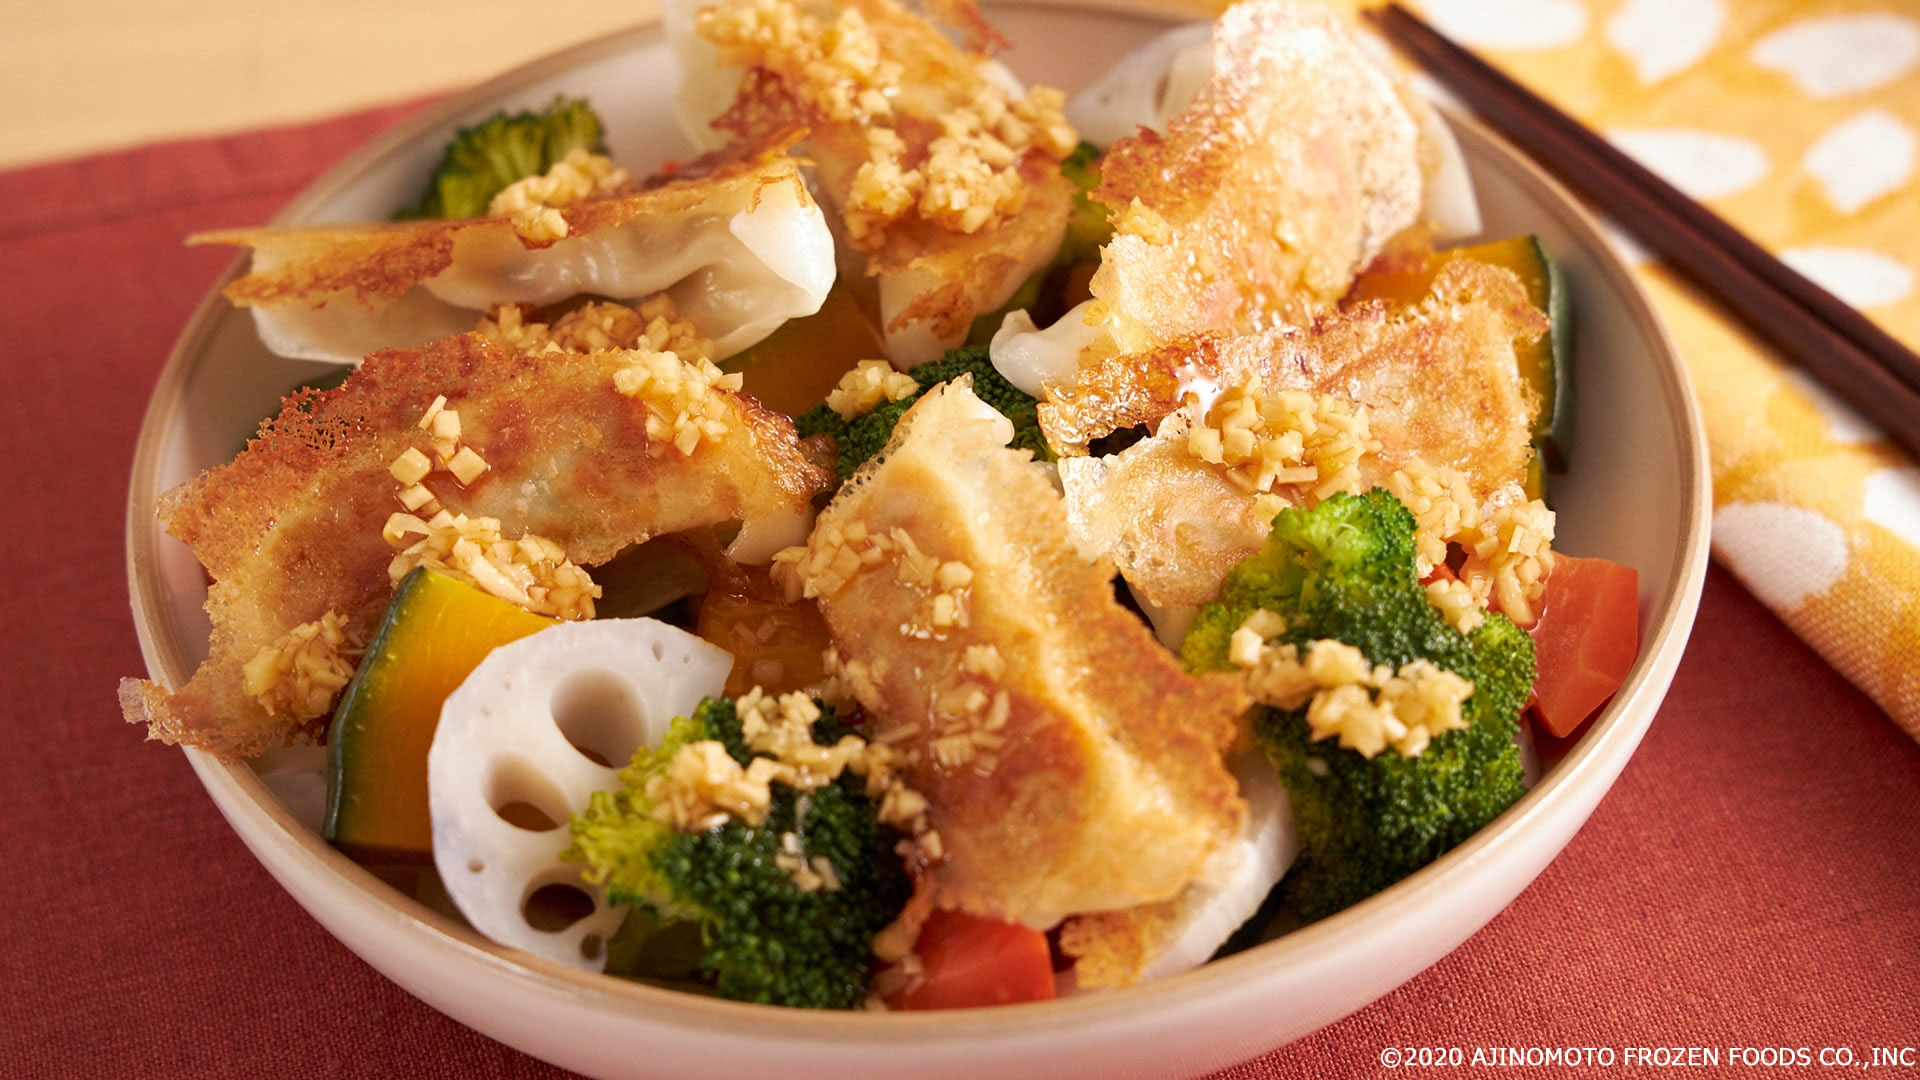 Steamed Vegetable Salad with Gyoza